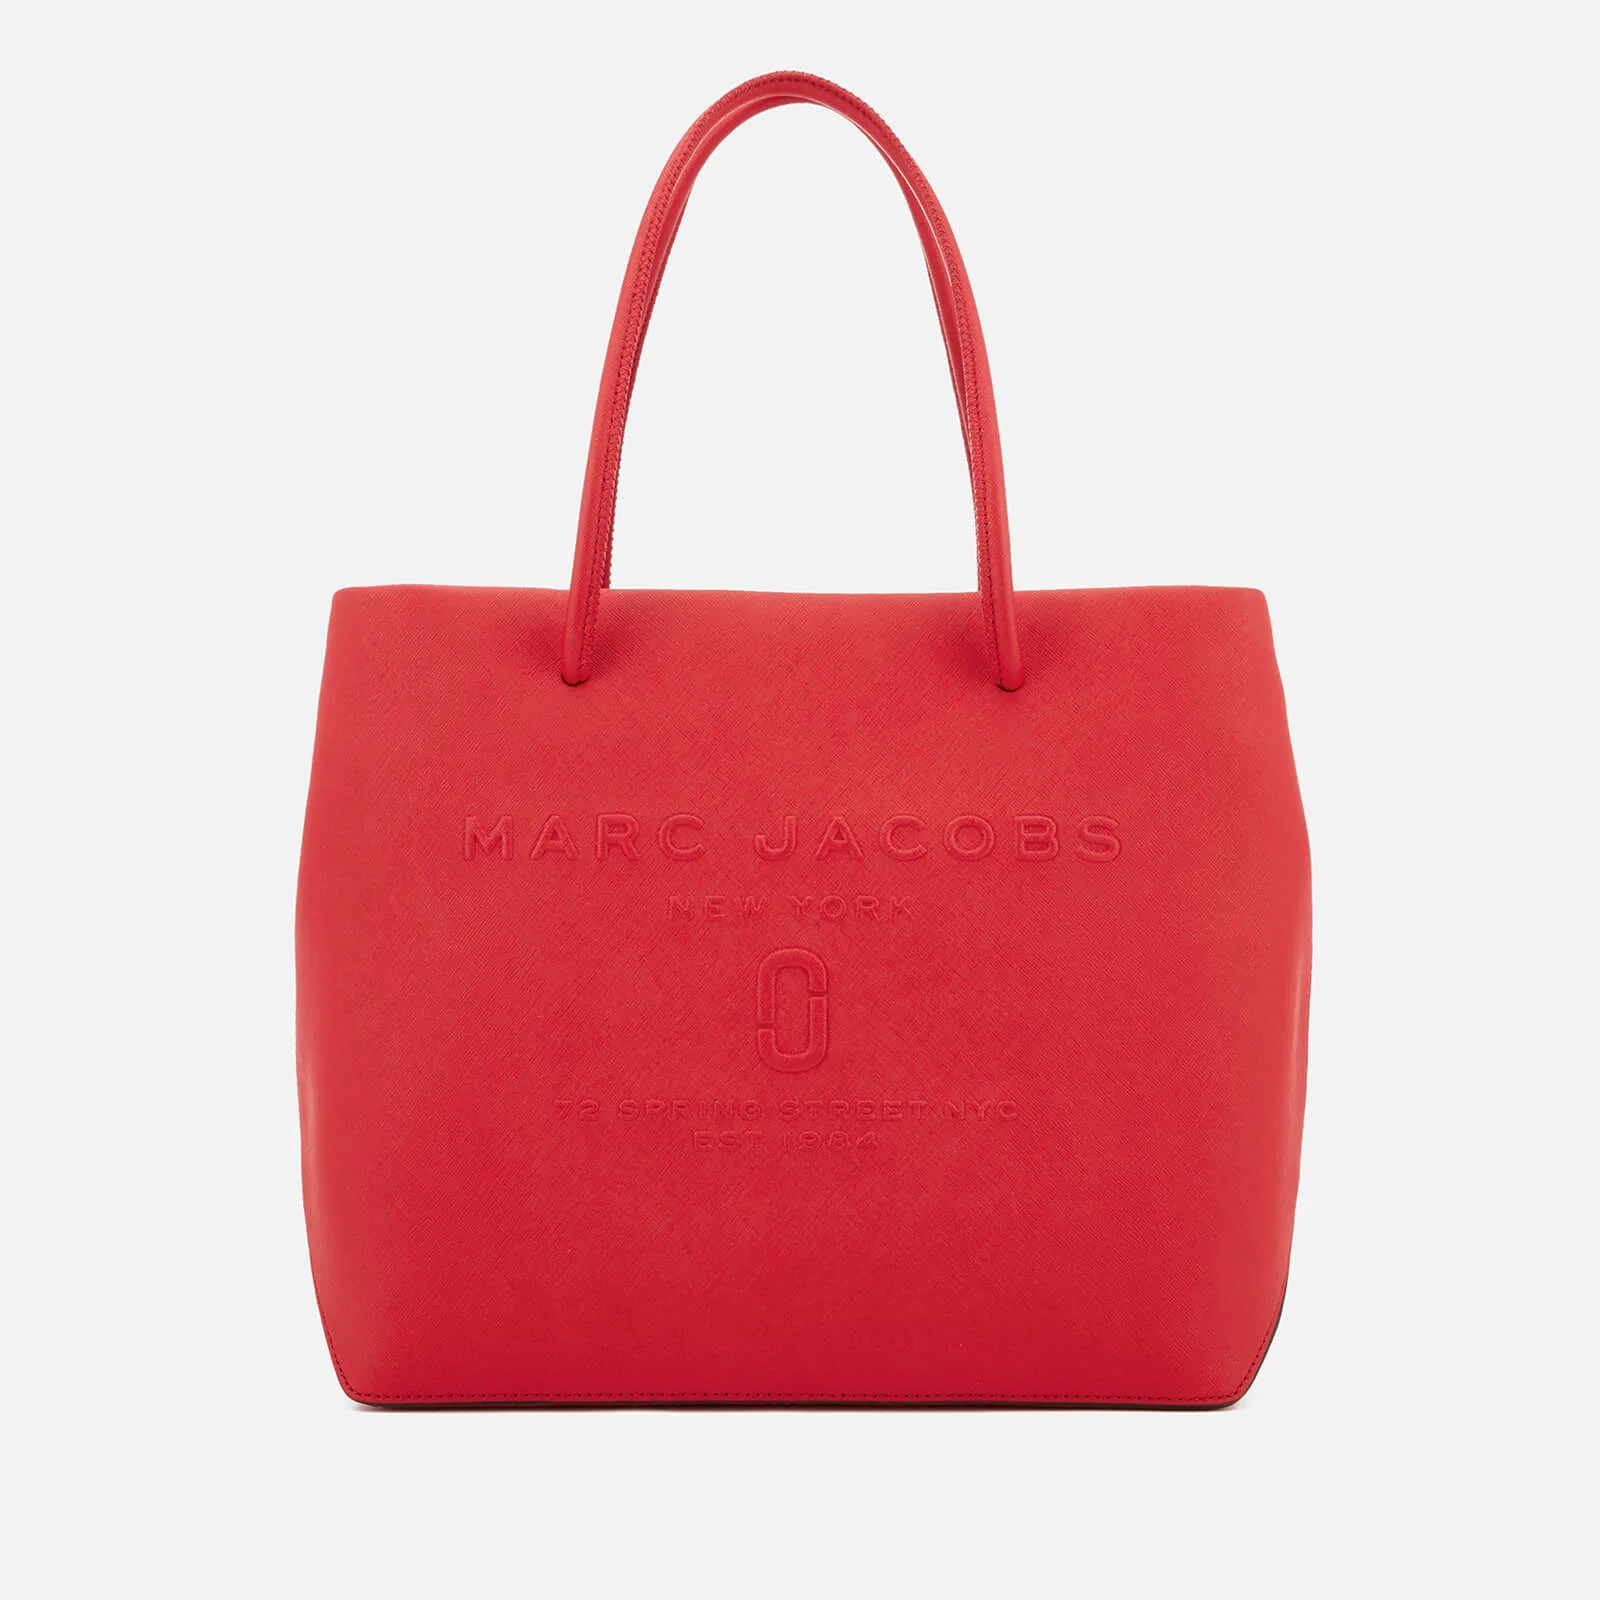 Marc Jacobs Women's Logo Shopper East West Tote Bag - Red Pepper Image 1